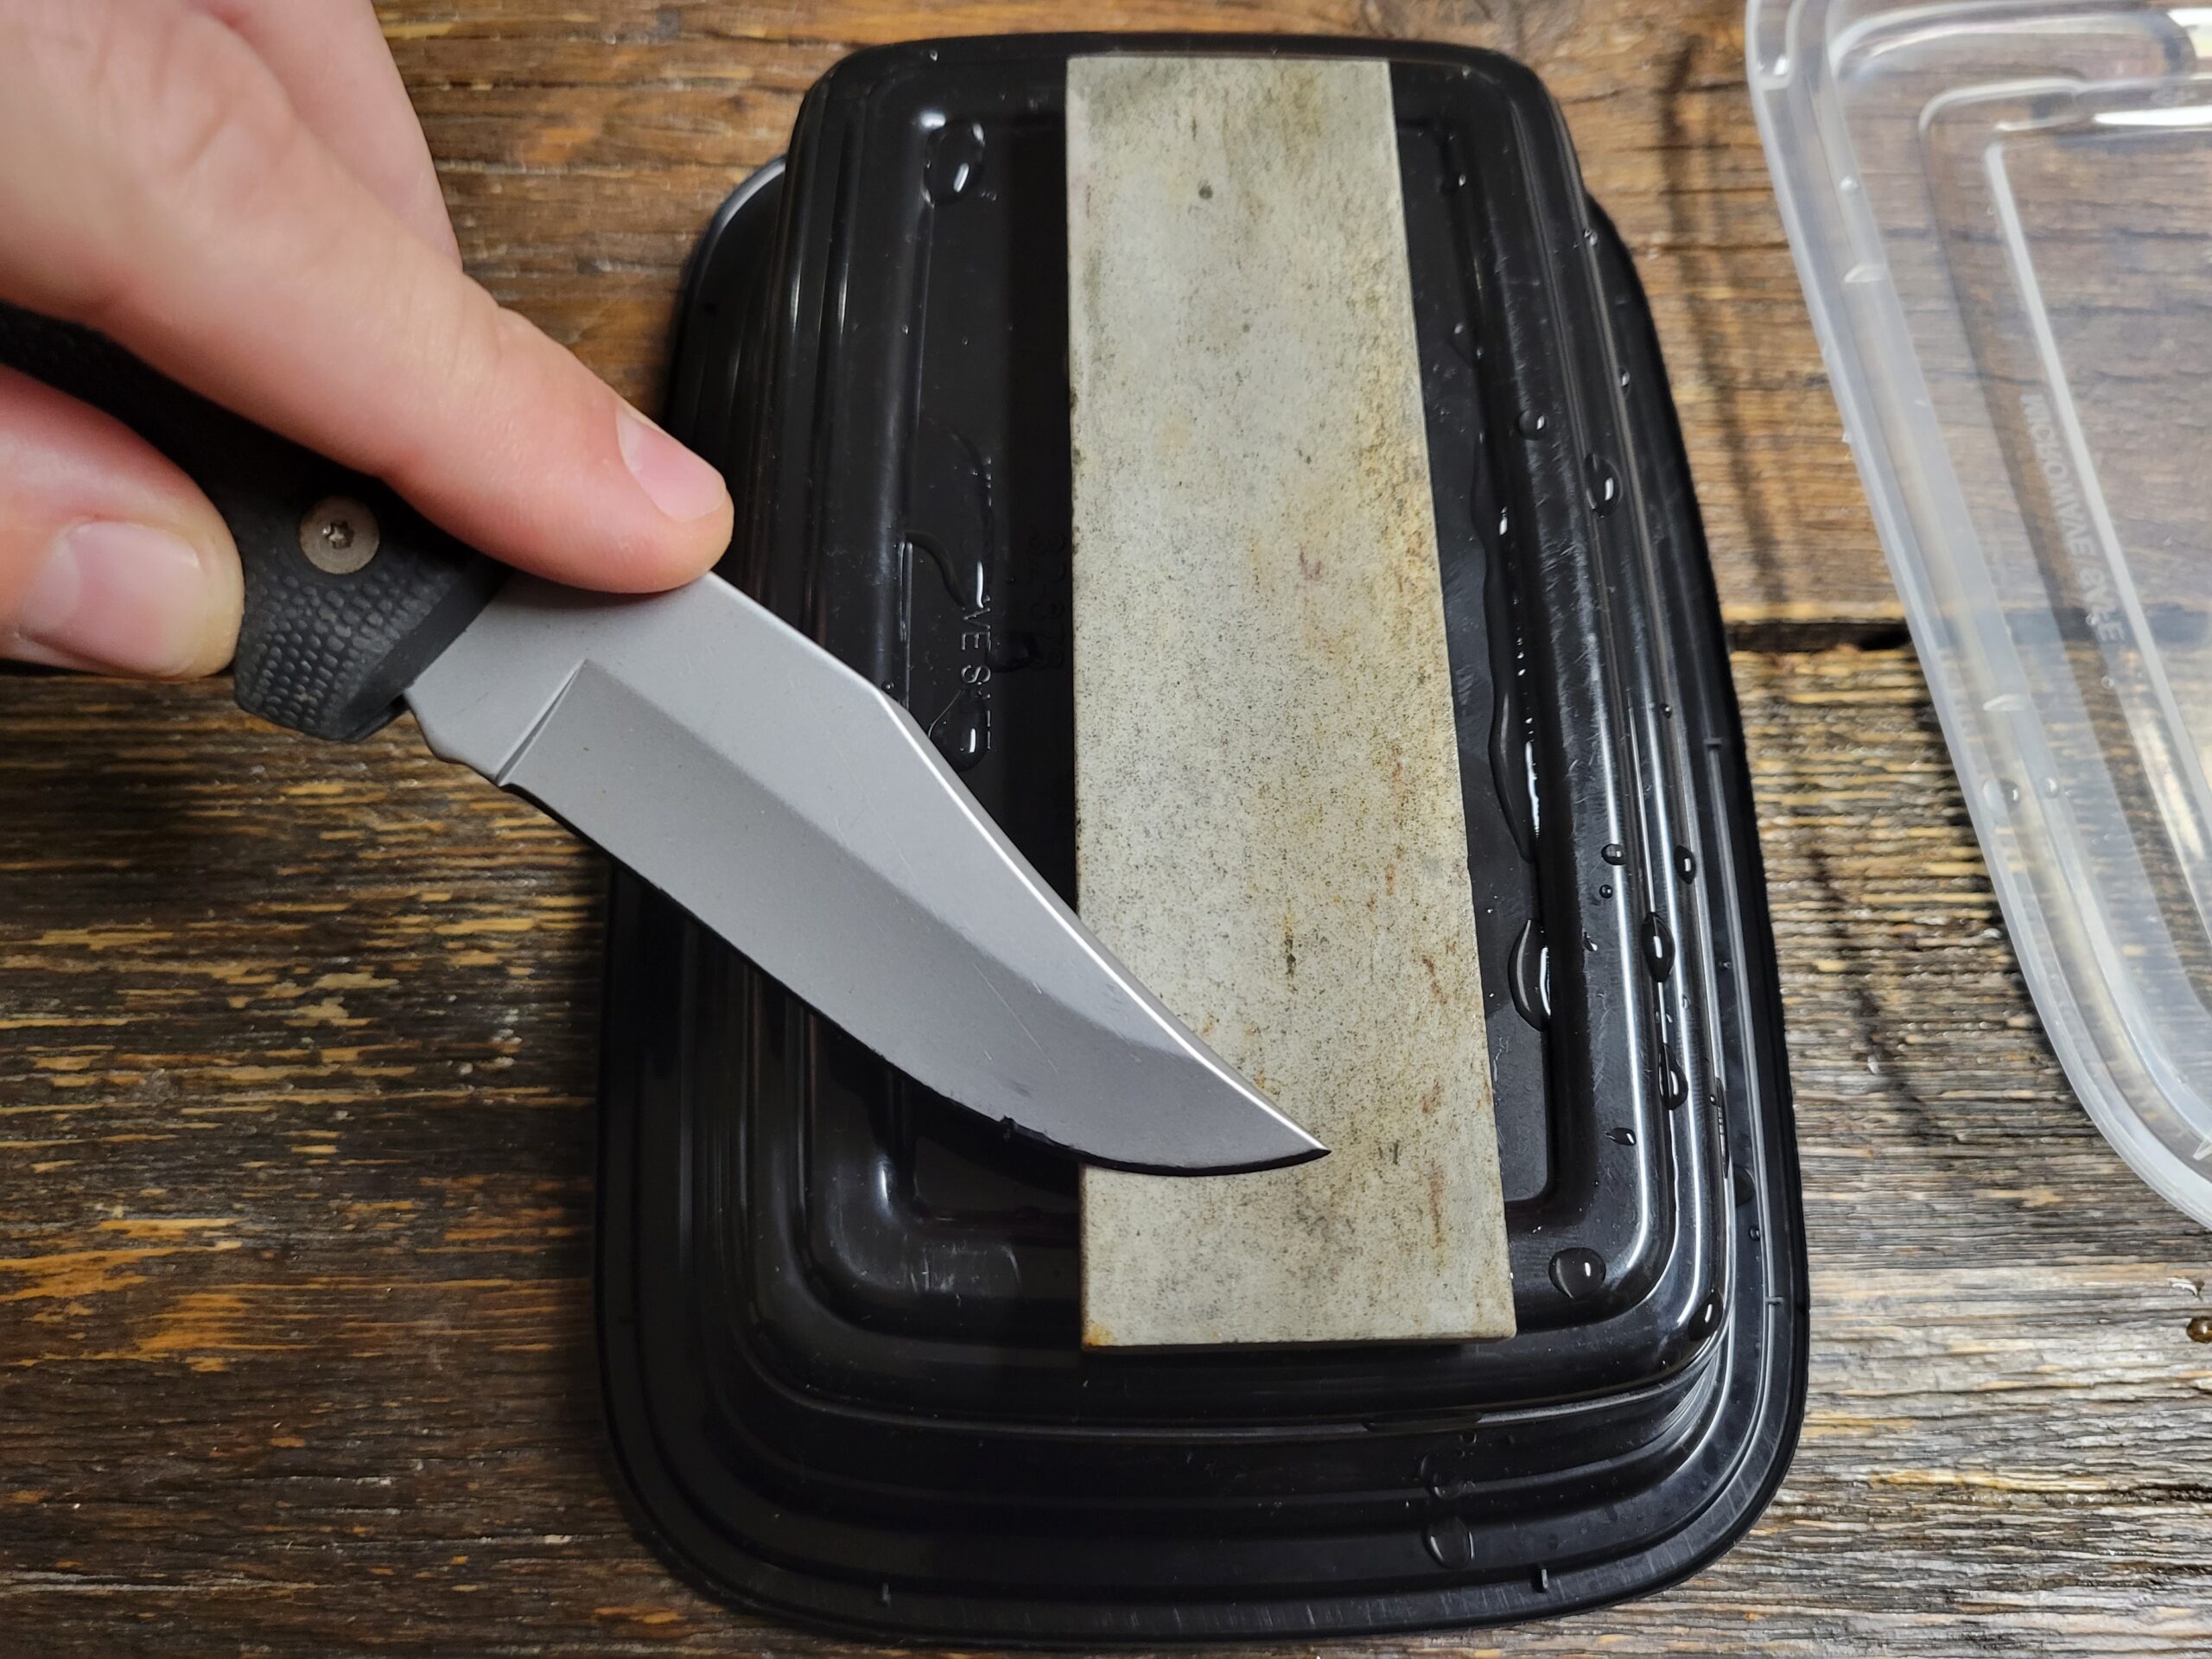 Sharpen Any Knife - Anywhere - With This Pocket Carry Tool